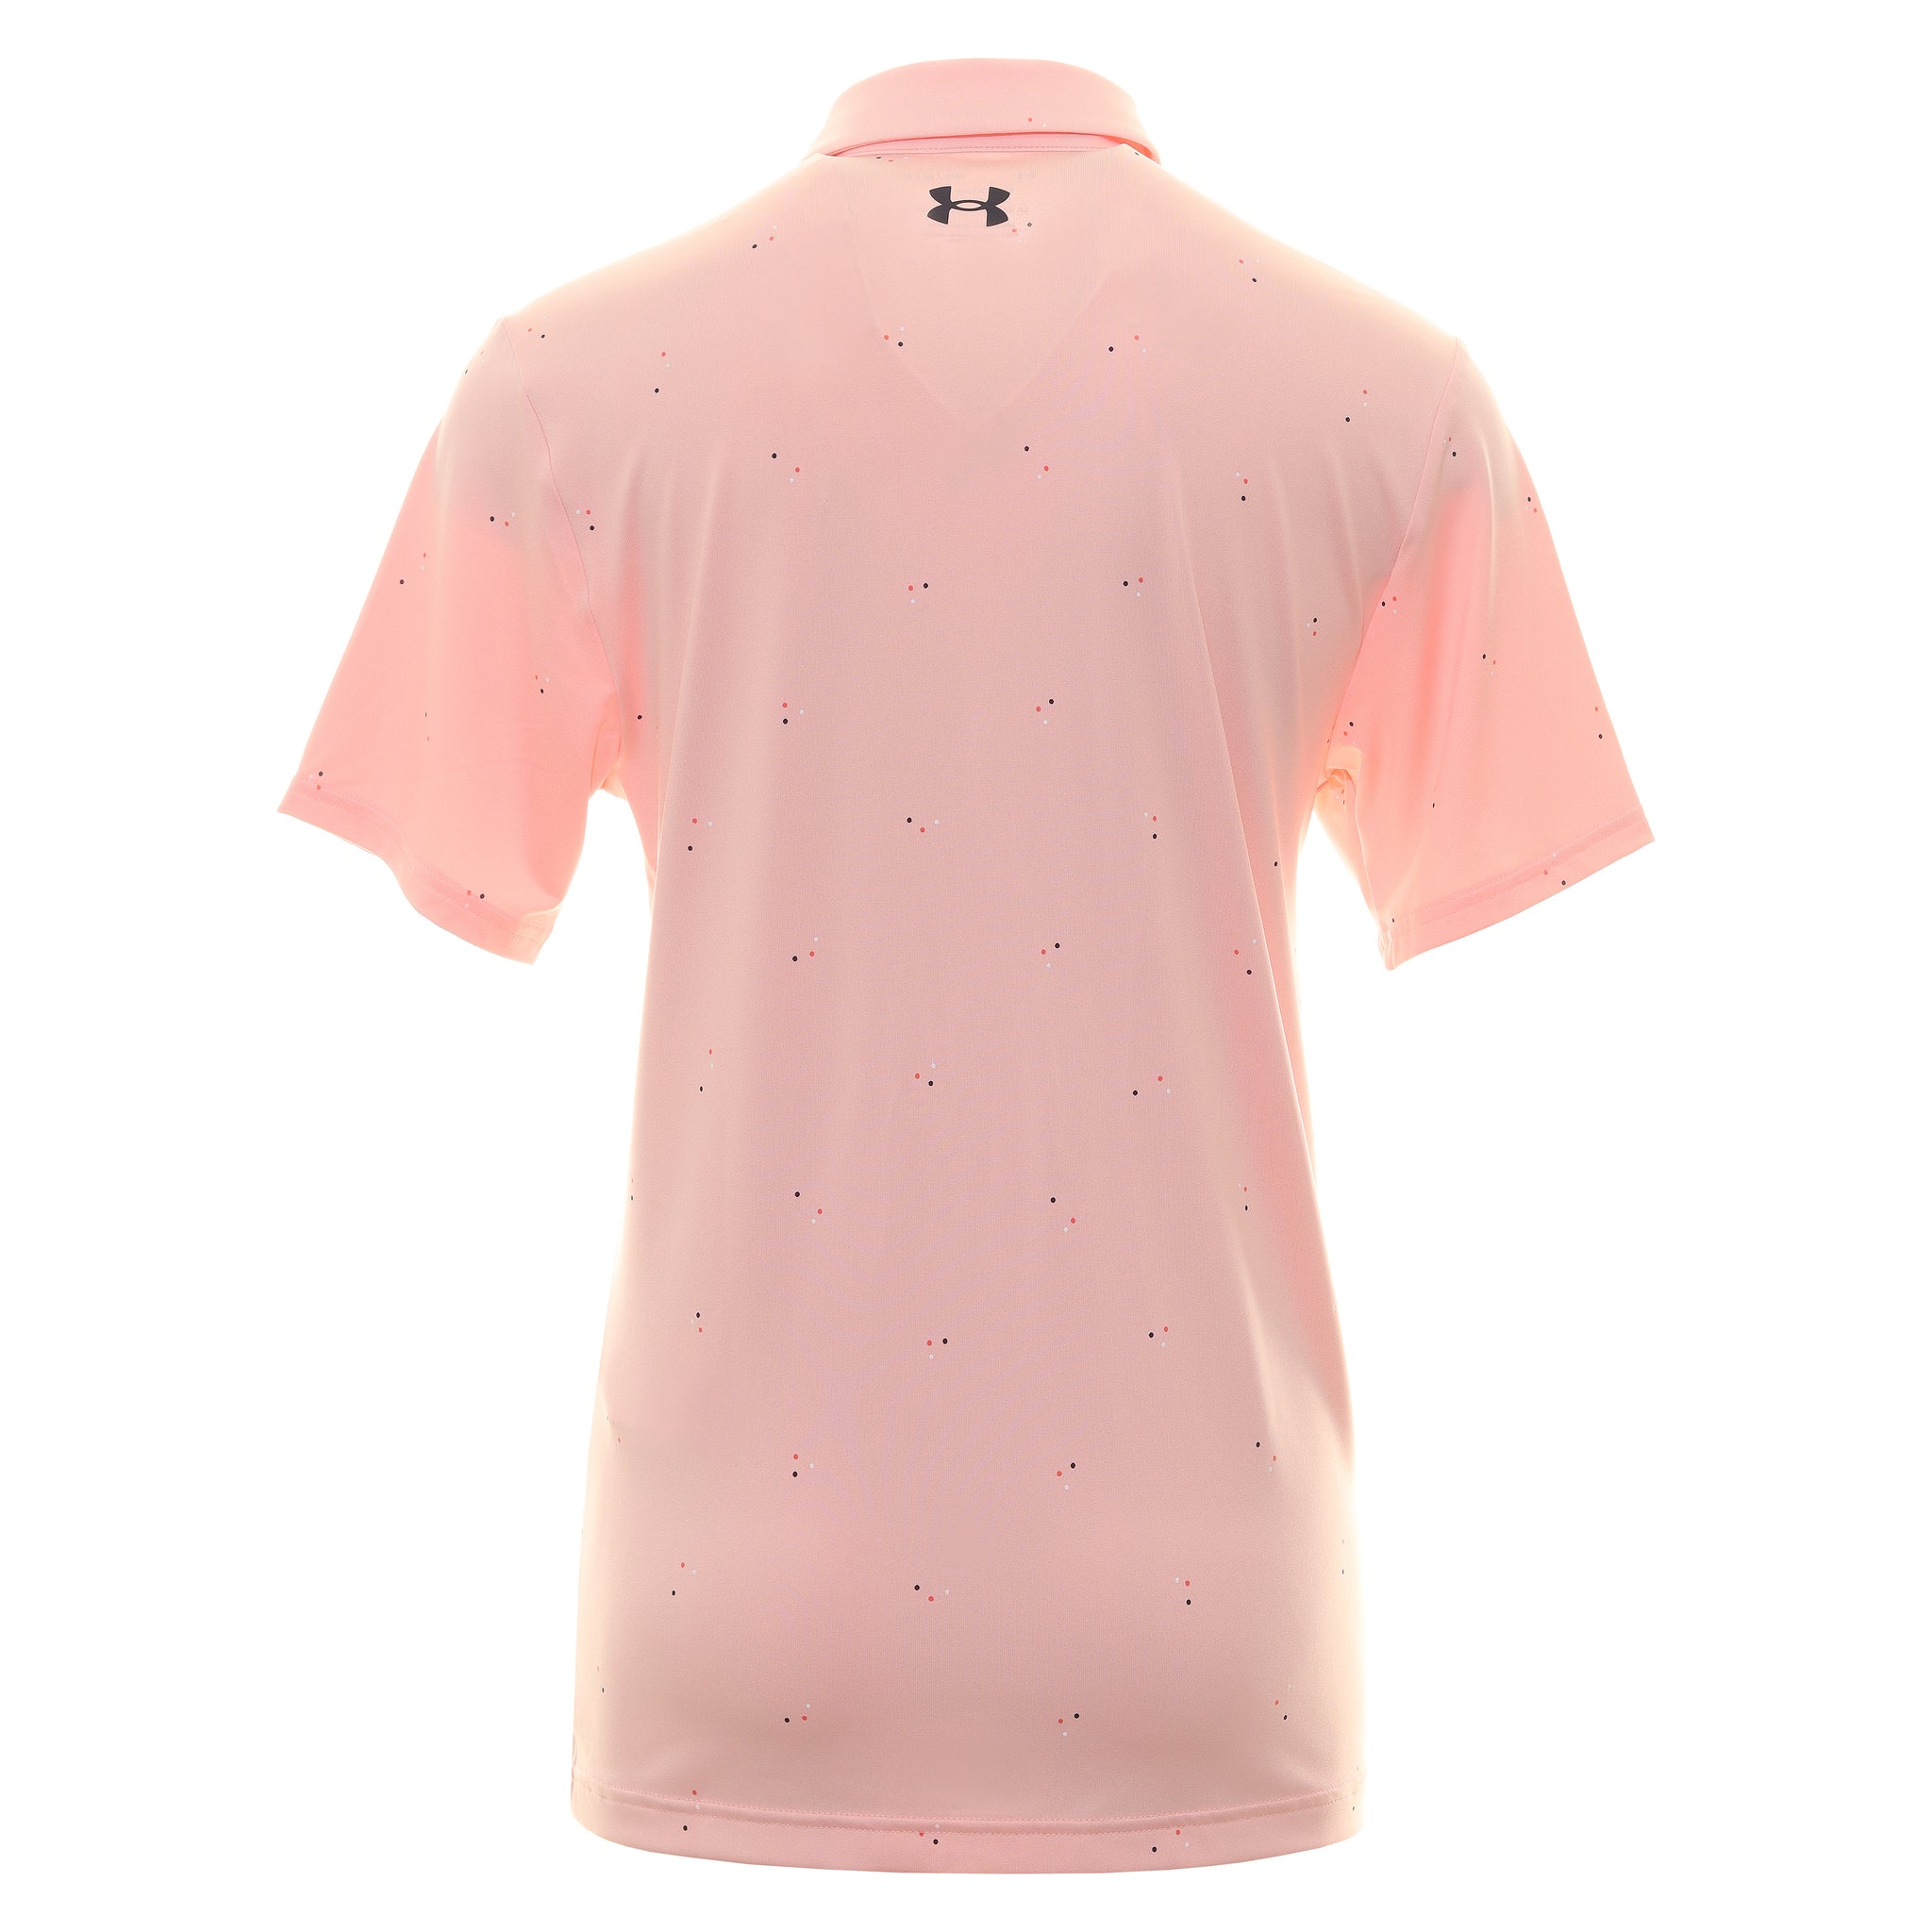 Under Armour, Shirts & Tops, Yml Under Armour Light Weight Racerback  Sports Bra In Peach And Pink Vguc